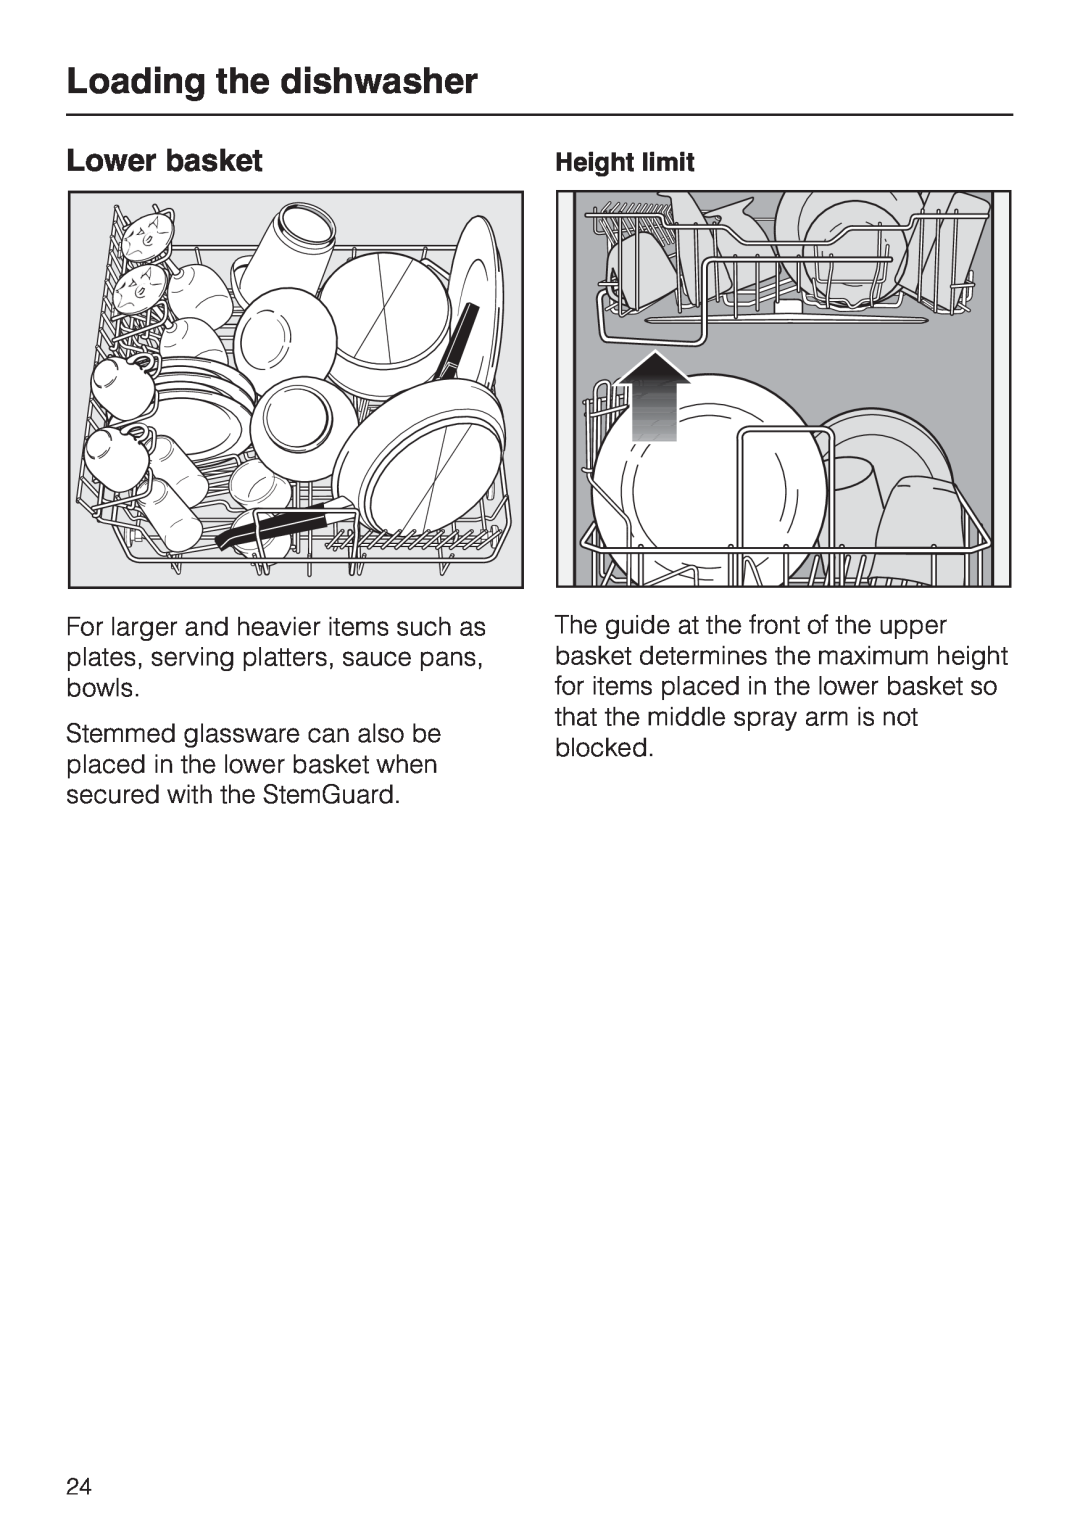 Miele HG01 operating instructions Lower basket, Height limit, Loading the dishwasher 